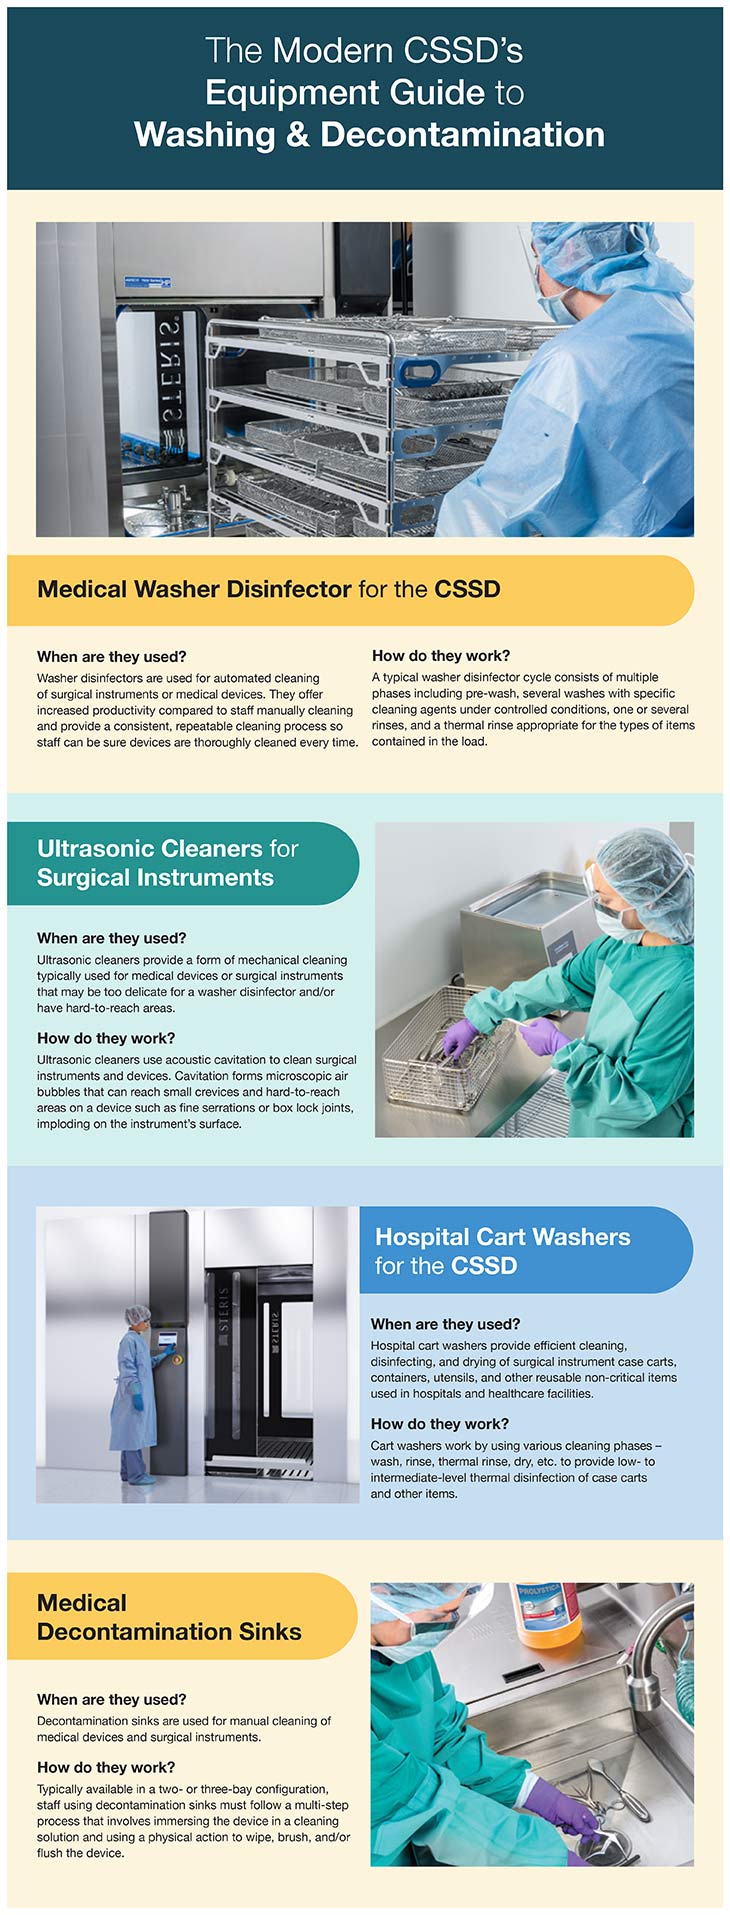 Medical Washer Disinfector Infographic